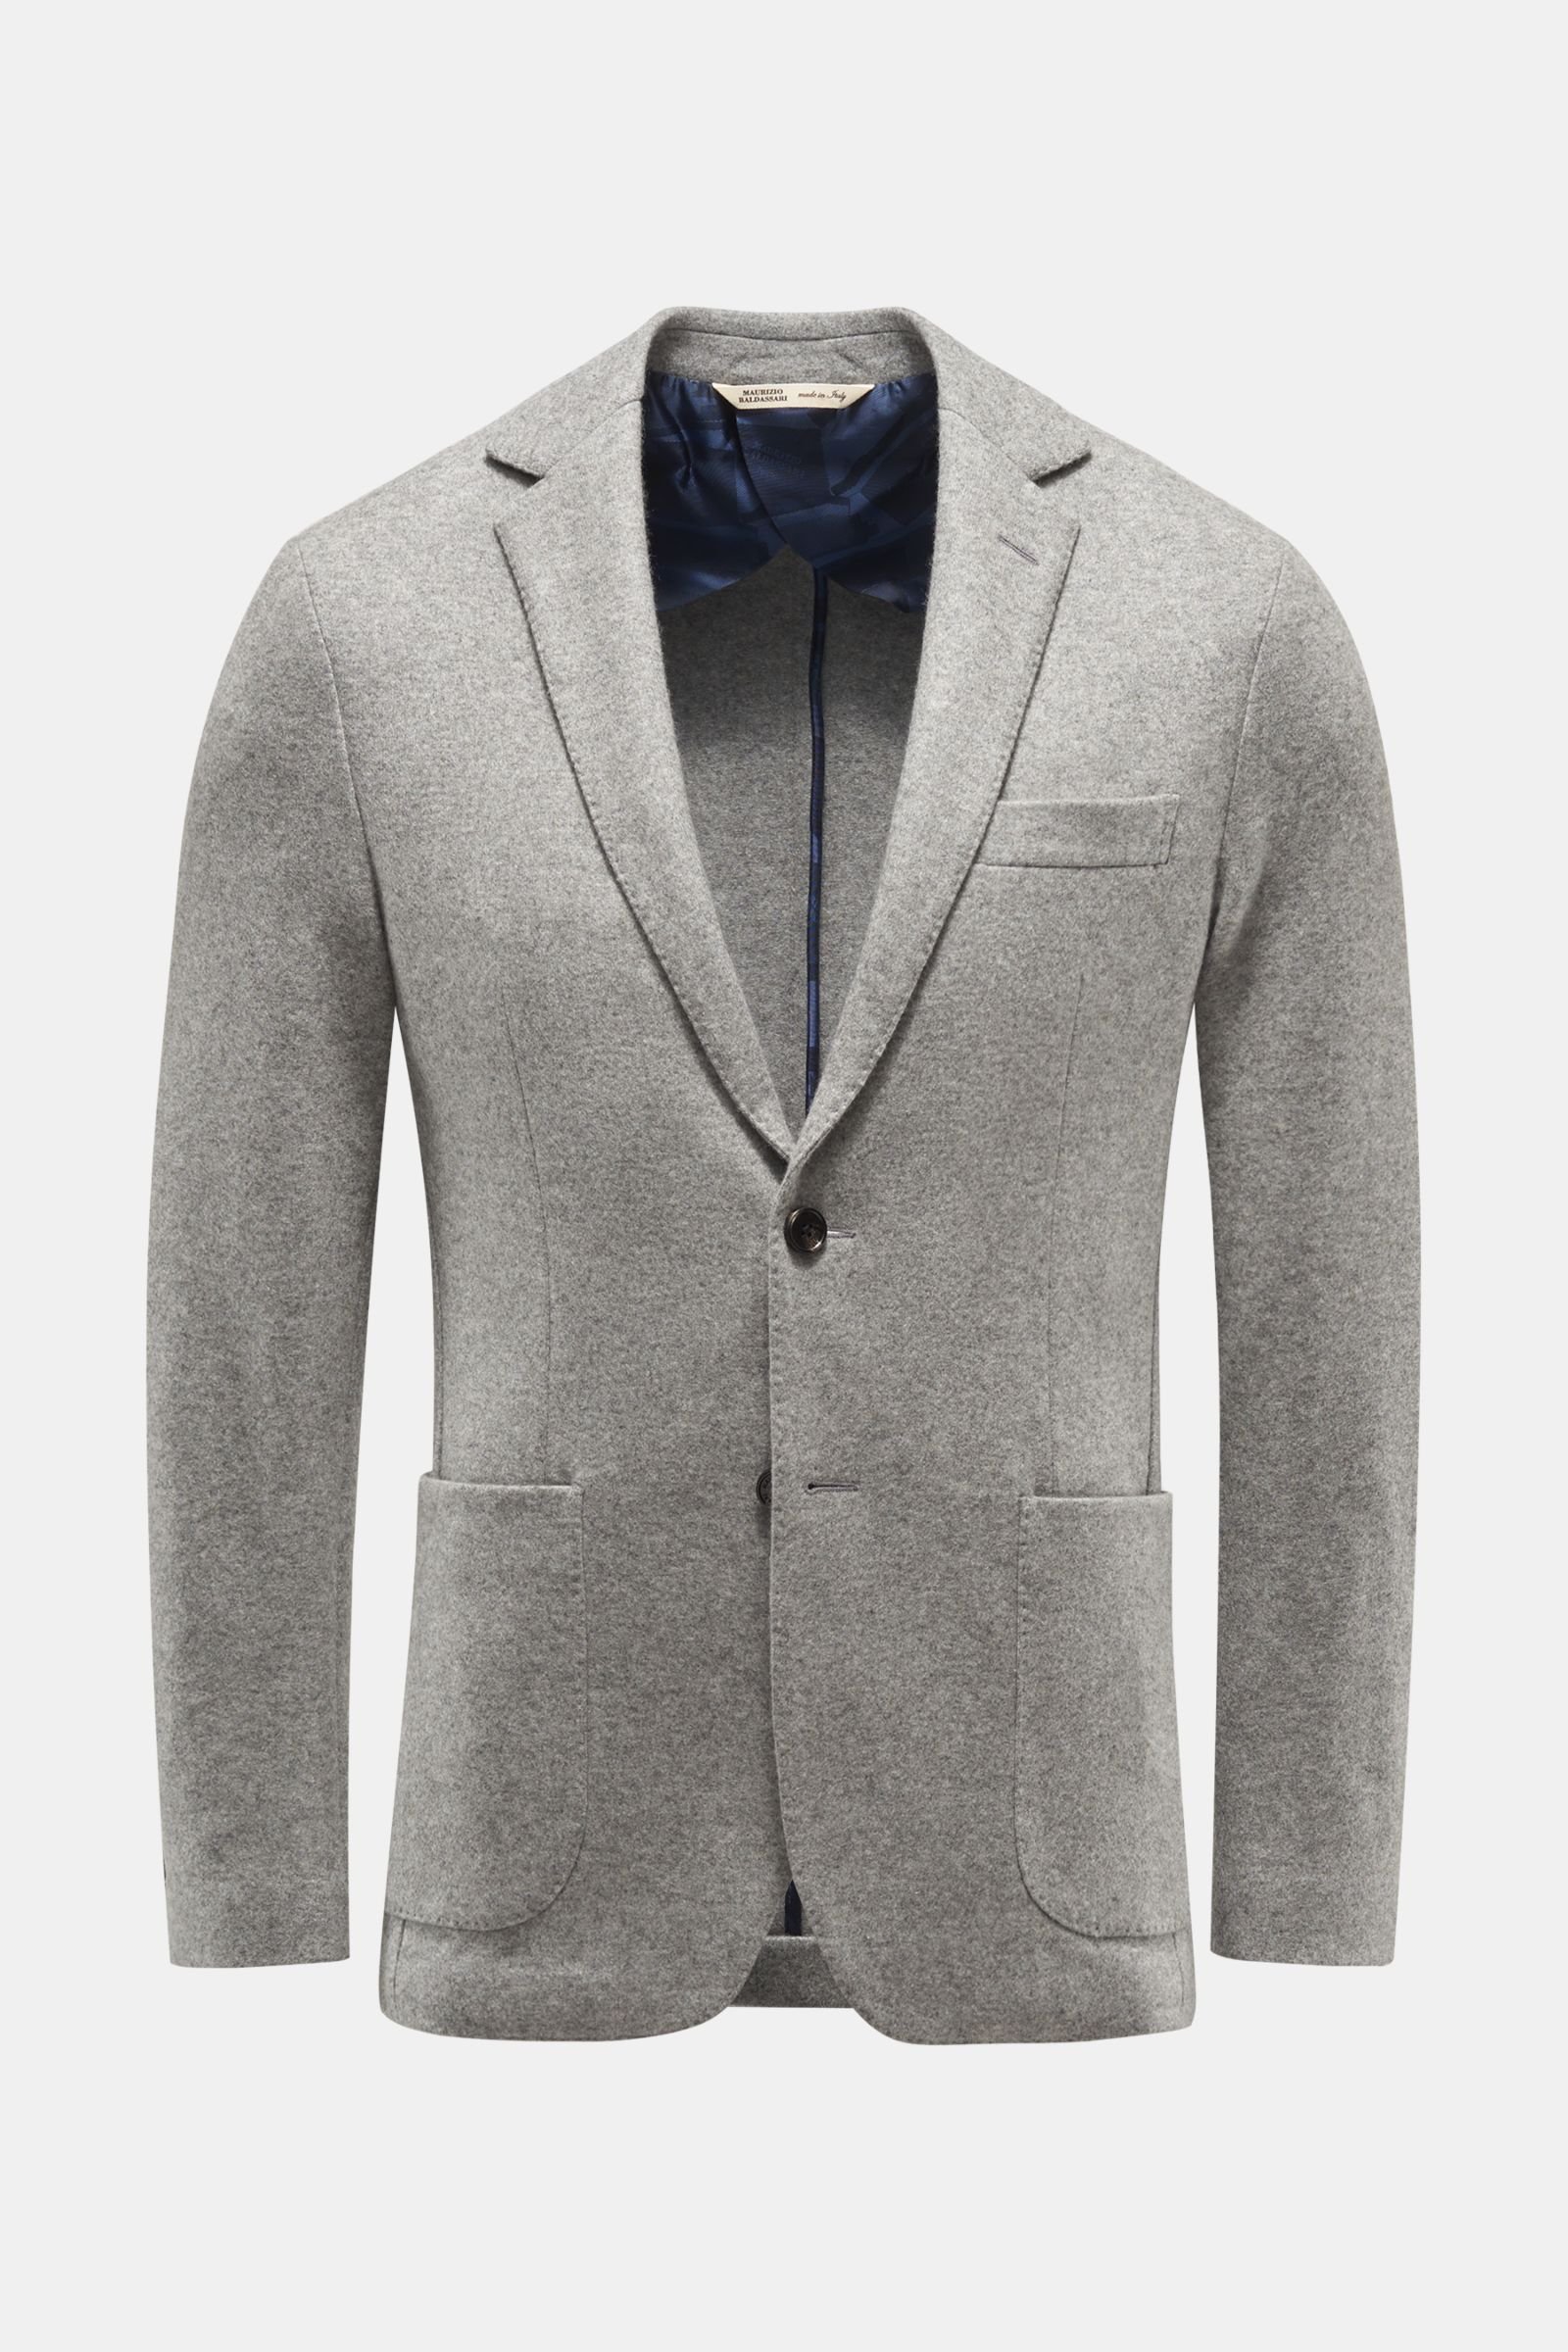 Cashmere smart-casual jacket grey